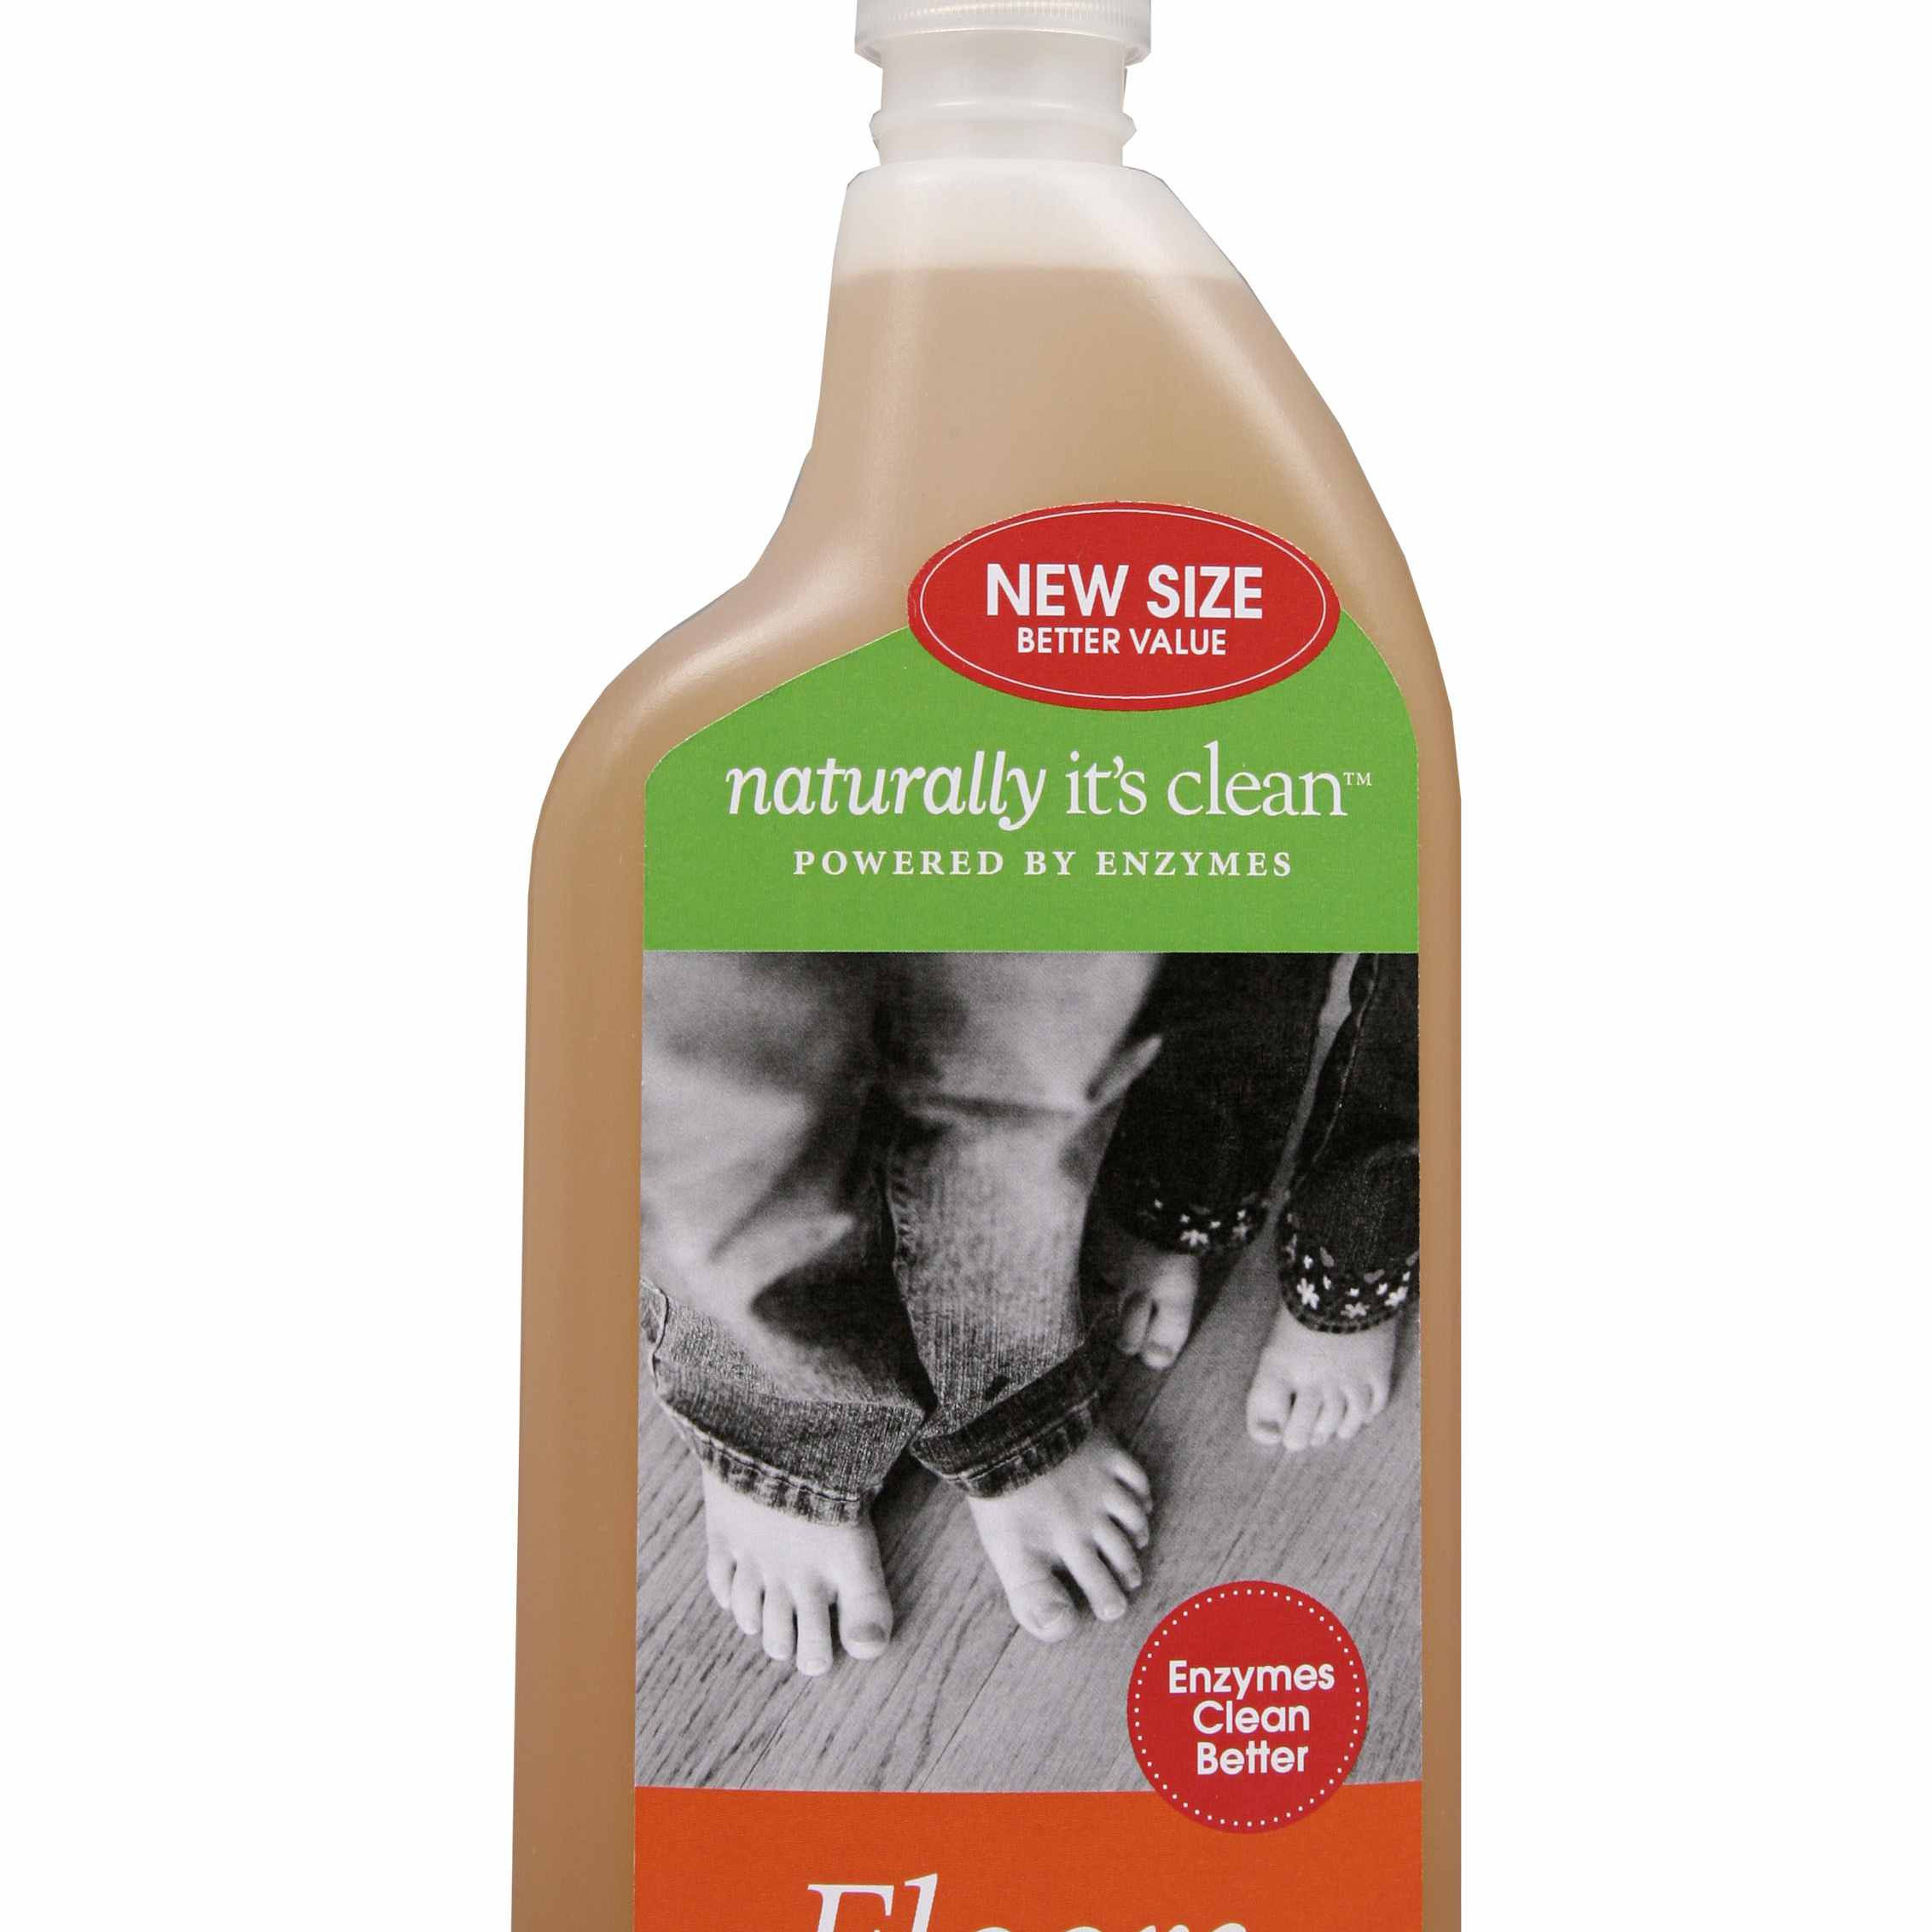 15 Stylish Hardwood Floor Cleaner Concentrate 2024 free download hardwood floor cleaner concentrate of adore your wood floors with these eco friendly cleaners throughout naturally its clean floors